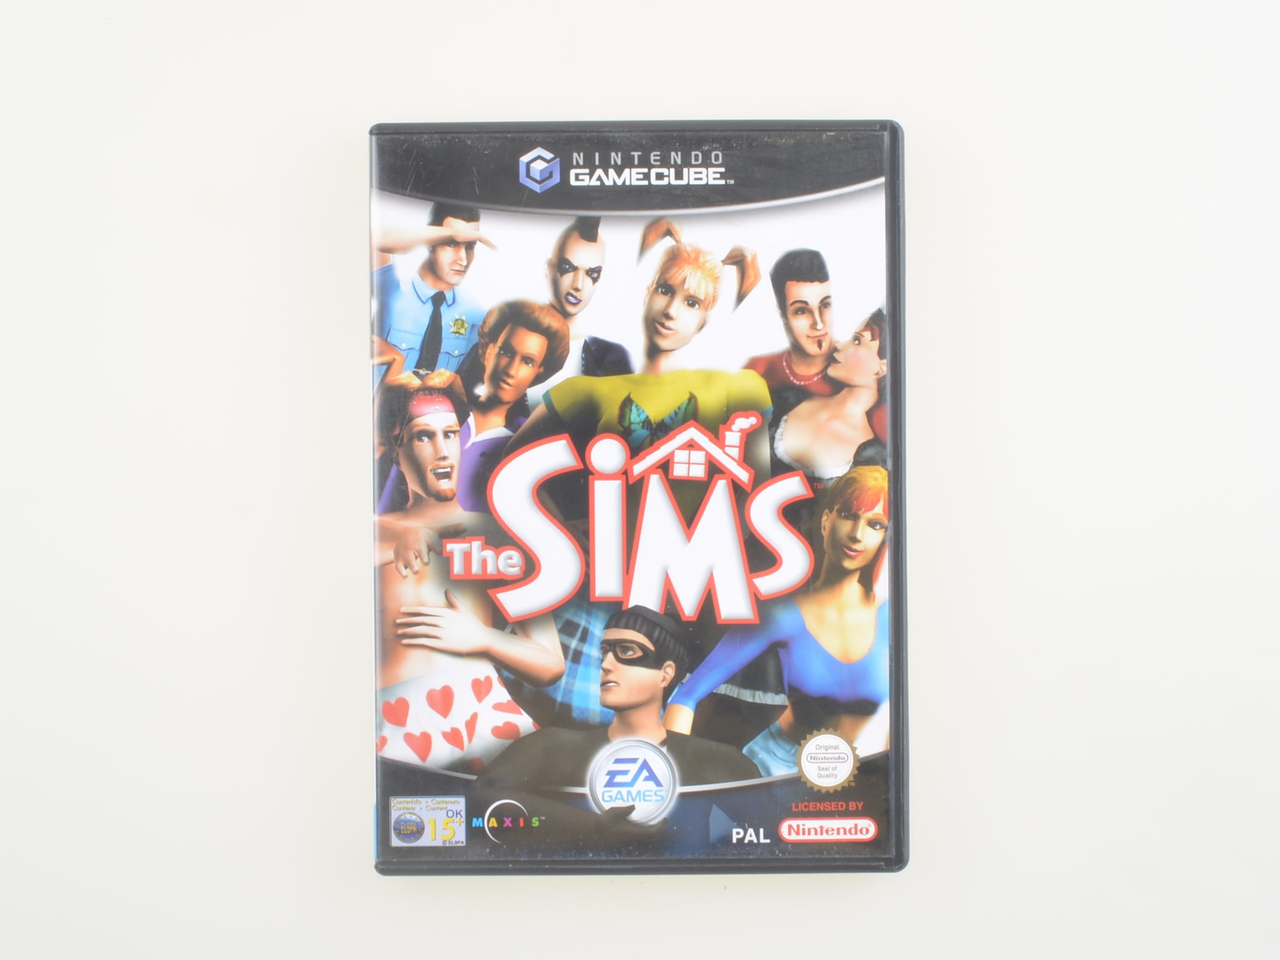 The Sims - Gamecube Games